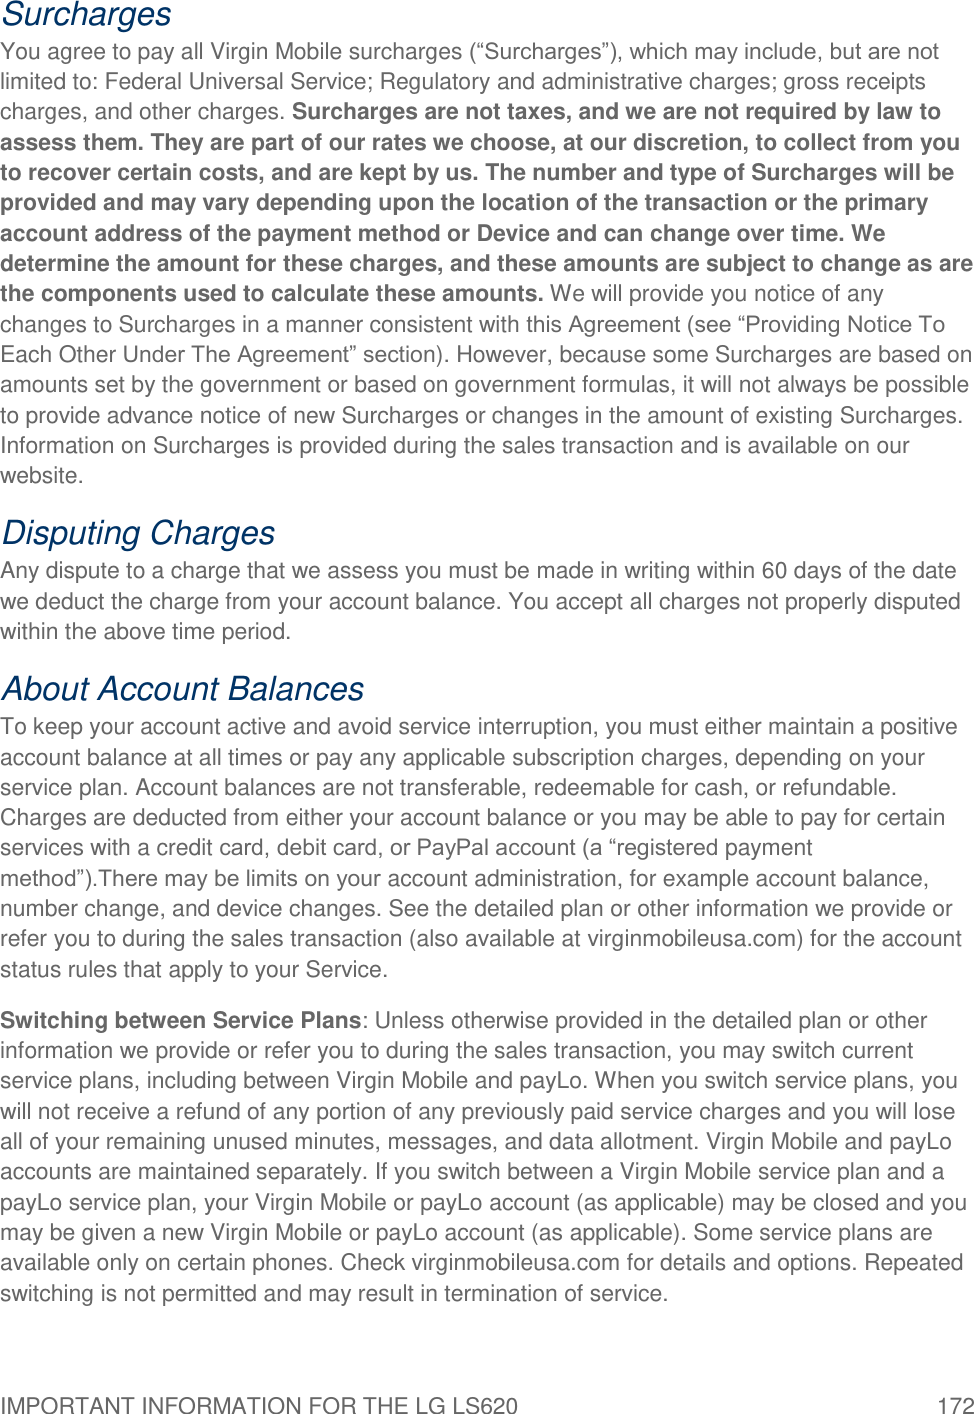 IMPORTANT INFORMATION FOR THE LG LS620  172 Surcharges You agree to pay all Virgin Mobile surcharges (―Surcharges‖), which may include, but are not limited to: Federal Universal Service; Regulatory and administrative charges; gross receipts charges, and other charges. Surcharges are not taxes, and we are not required by law to assess them. They are part of our rates we choose, at our discretion, to collect from you to recover certain costs, and are kept by us. The number and type of Surcharges will be provided and may vary depending upon the location of the transaction or the primary account address of the payment method or Device and can change over time. We determine the amount for these charges, and these amounts are subject to change as are the components used to calculate these amounts. We will provide you notice of any changes to Surcharges in a manner consistent with this Agreement (see ―Providing Notice To Each Other Under The Agreement‖ section). However, because some Surcharges are based on amounts set by the government or based on government formulas, it will not always be possible to provide advance notice of new Surcharges or changes in the amount of existing Surcharges. Information on Surcharges is provided during the sales transaction and is available on our website. Disputing Charges Any dispute to a charge that we assess you must be made in writing within 60 days of the date we deduct the charge from your account balance. You accept all charges not properly disputed within the above time period. About Account Balances To keep your account active and avoid service interruption, you must either maintain a positive account balance at all times or pay any applicable subscription charges, depending on your service plan. Account balances are not transferable, redeemable for cash, or refundable. Charges are deducted from either your account balance or you may be able to pay for certain services with a credit card, debit card, or PayPal account (a ―registered payment method‖).There may be limits on your account administration, for example account balance, number change, and device changes. See the detailed plan or other information we provide or refer you to during the sales transaction (also available at virginmobileusa.com) for the account status rules that apply to your Service.  Switching between Service Plans: Unless otherwise provided in the detailed plan or other information we provide or refer you to during the sales transaction, you may switch current service plans, including between Virgin Mobile and payLo. When you switch service plans, you will not receive a refund of any portion of any previously paid service charges and you will lose all of your remaining unused minutes, messages, and data allotment. Virgin Mobile and payLo accounts are maintained separately. If you switch between a Virgin Mobile service plan and a payLo service plan, your Virgin Mobile or payLo account (as applicable) may be closed and you may be given a new Virgin Mobile or payLo account (as applicable). Some service plans are available only on certain phones. Check virginmobileusa.com for details and options. Repeated switching is not permitted and may result in termination of service. 